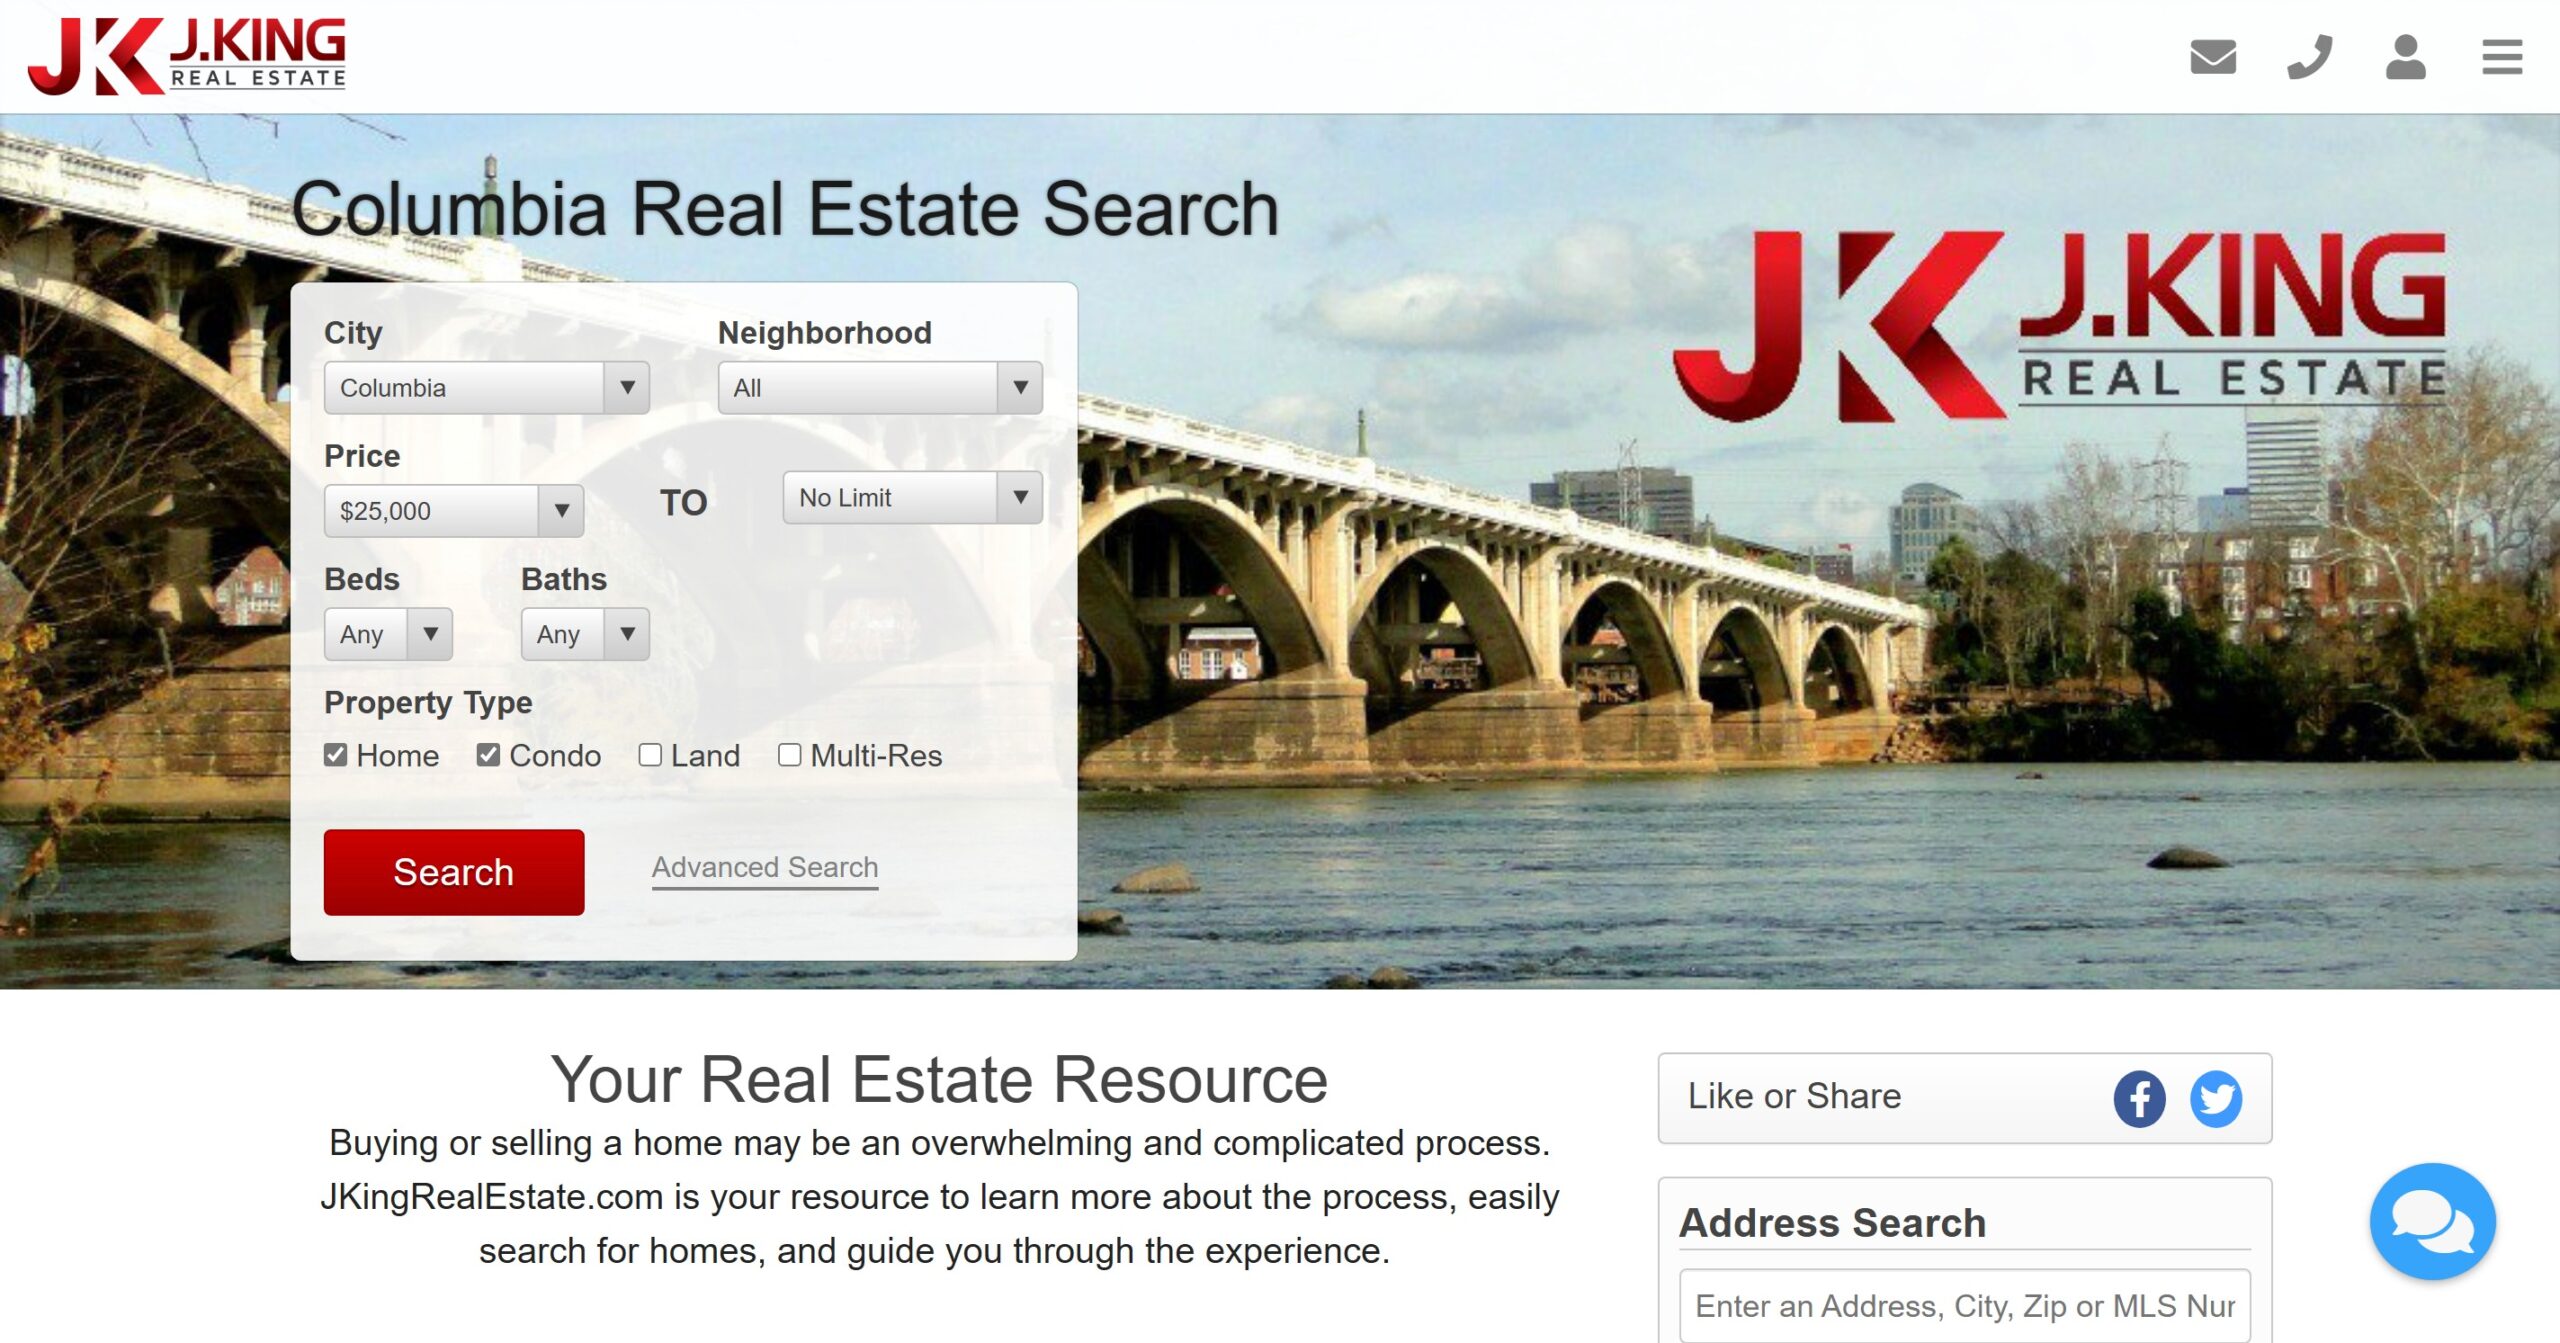 Top 5 Residential Real Estate Agents in Irmo SC: Find Your Dream Home Today